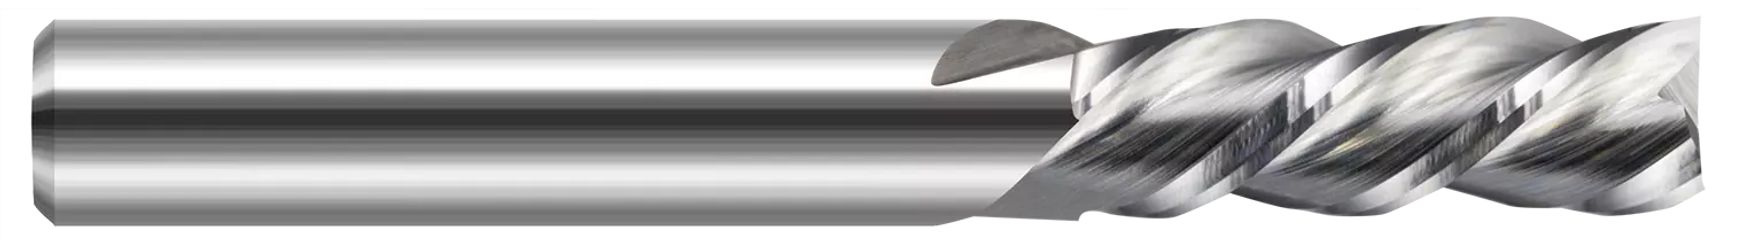 Variable Helix End Mills for Aluminum Alloys - Square - Downcut